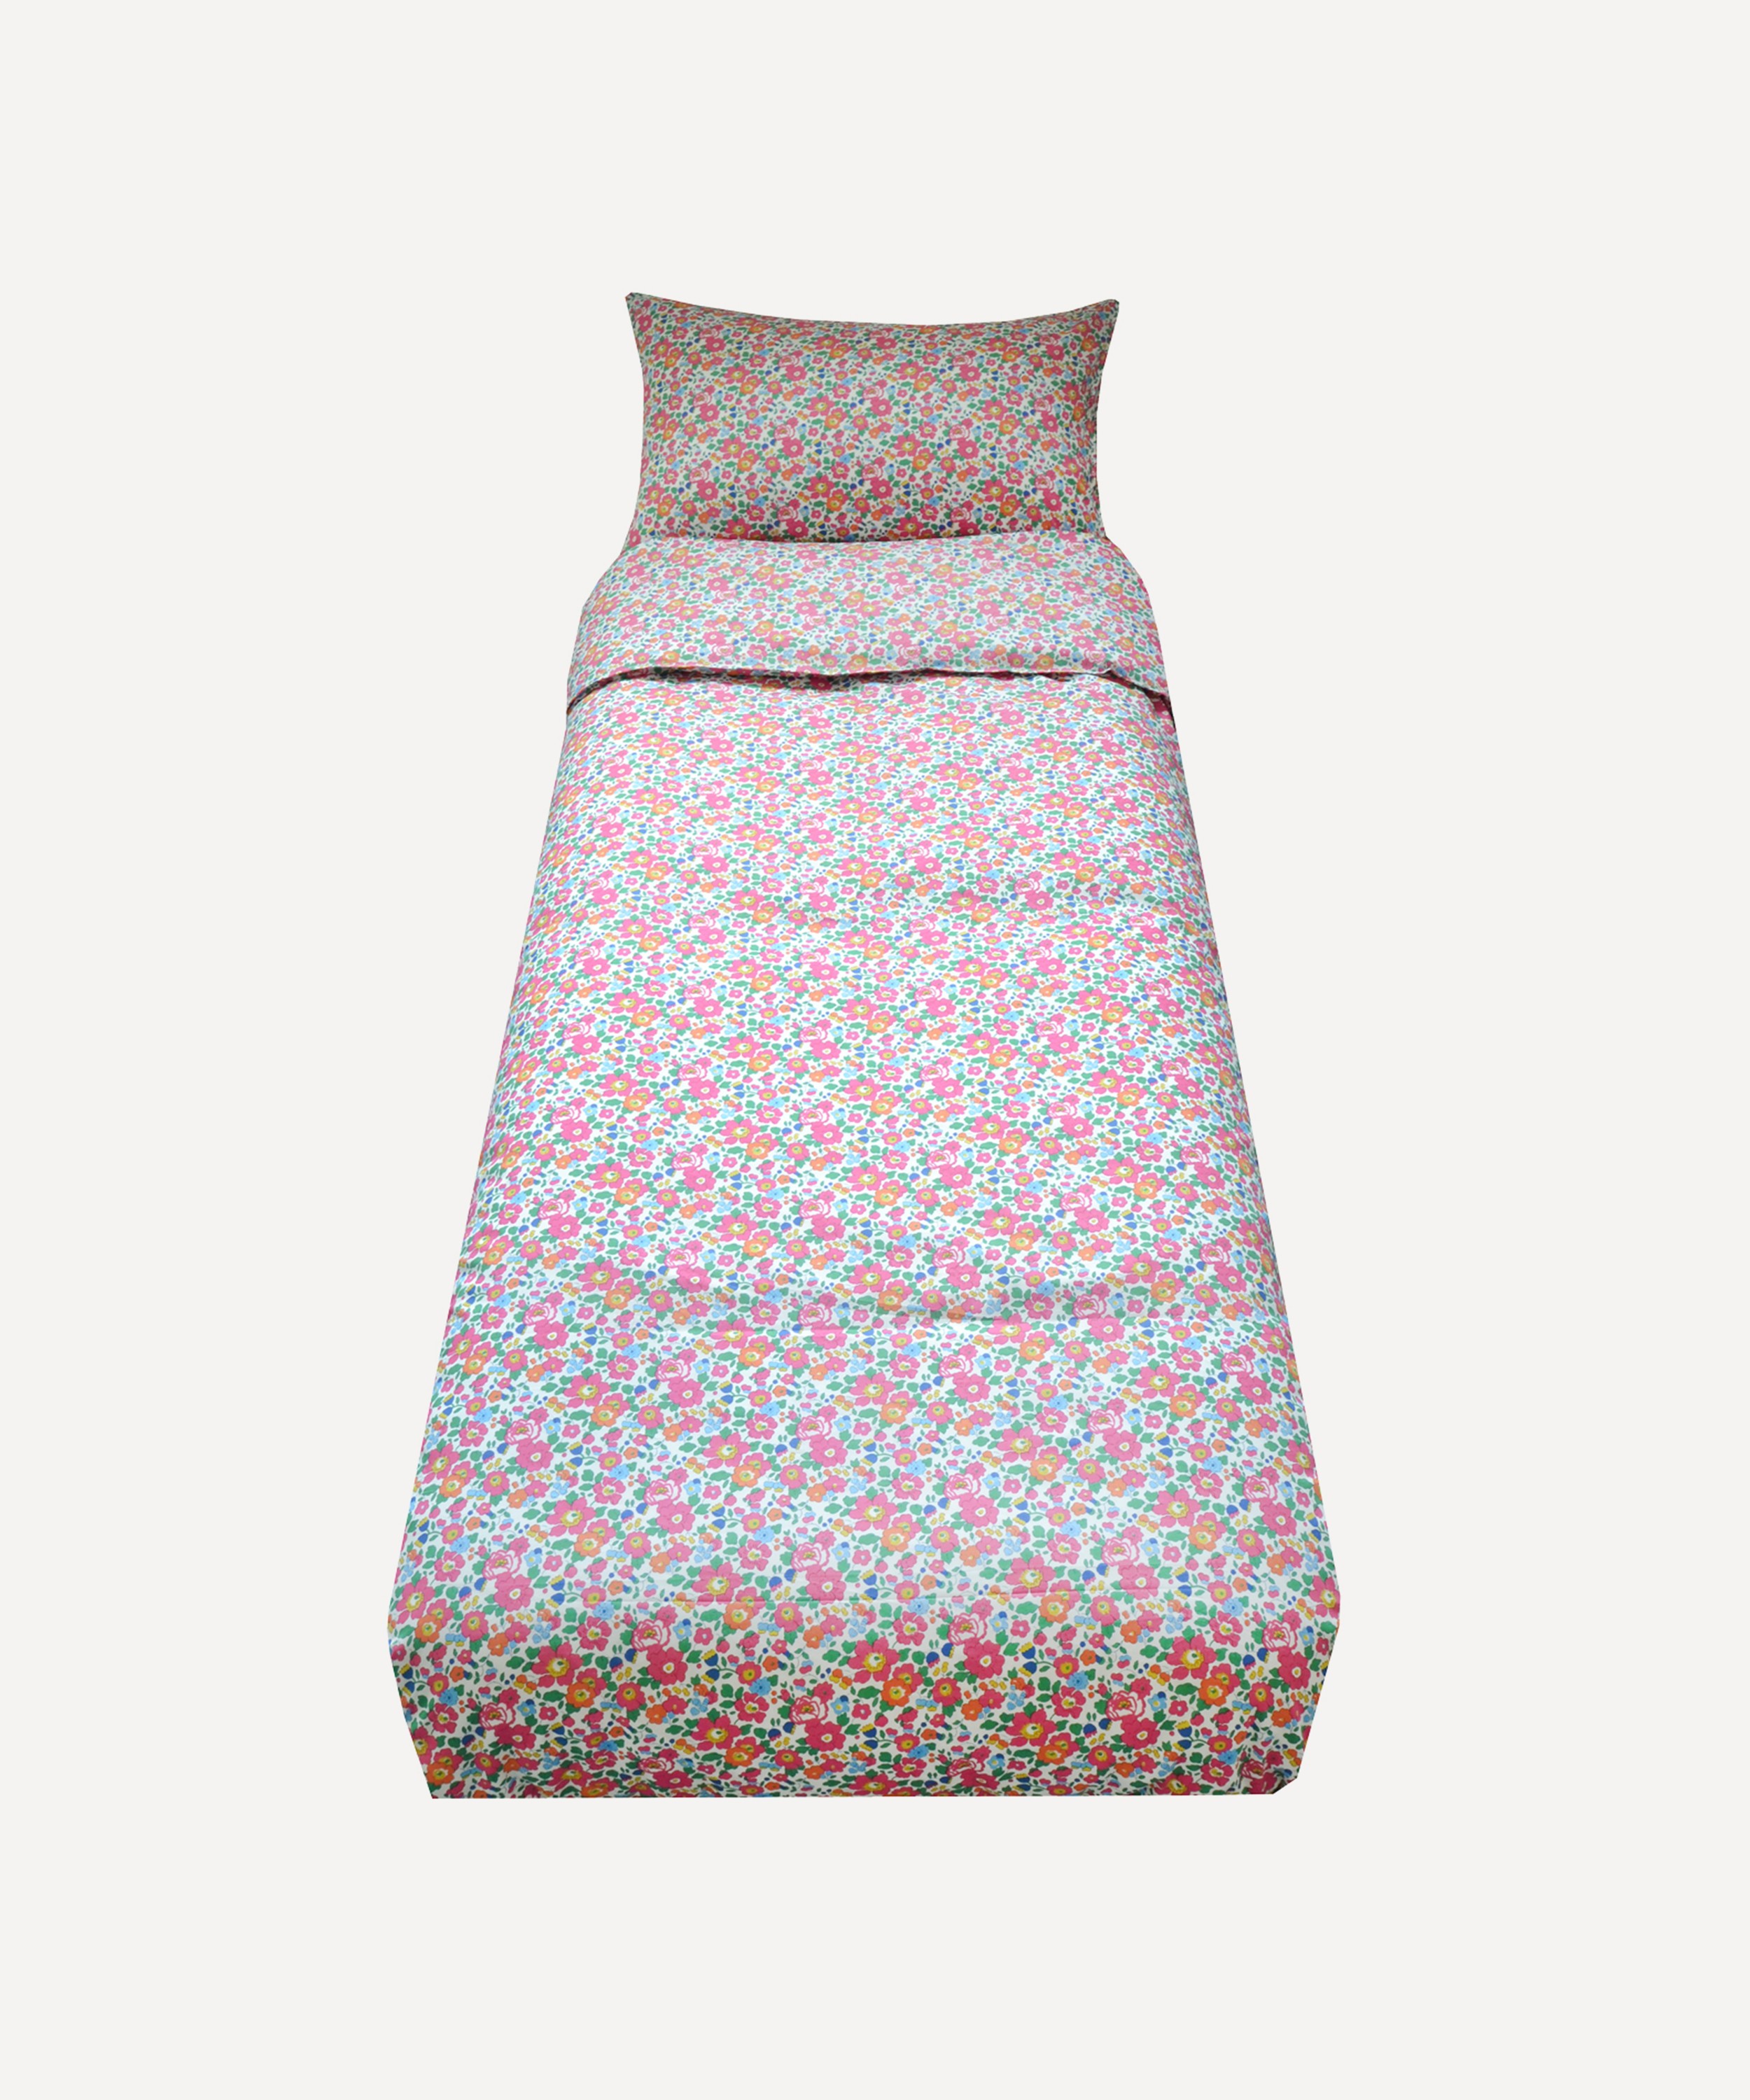 Coco & Wolf - Betsy Deep Pink Single Duvet Cover Set image number 0